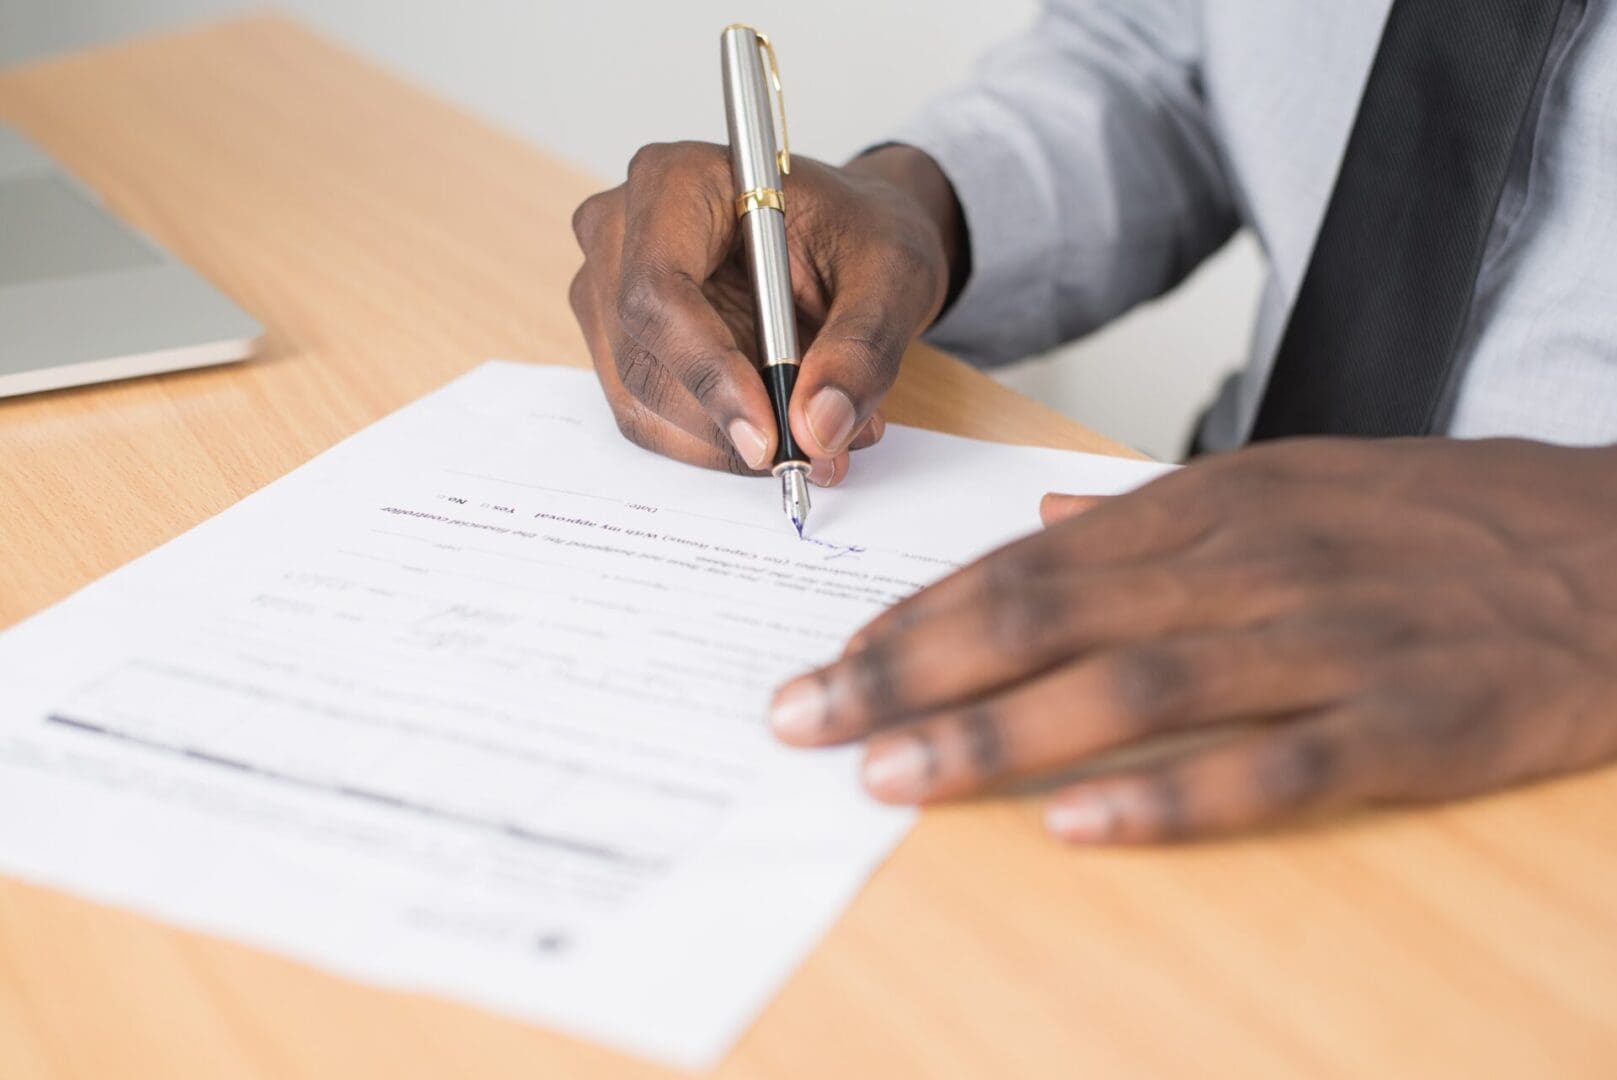 Person signing a lease document on a desk.